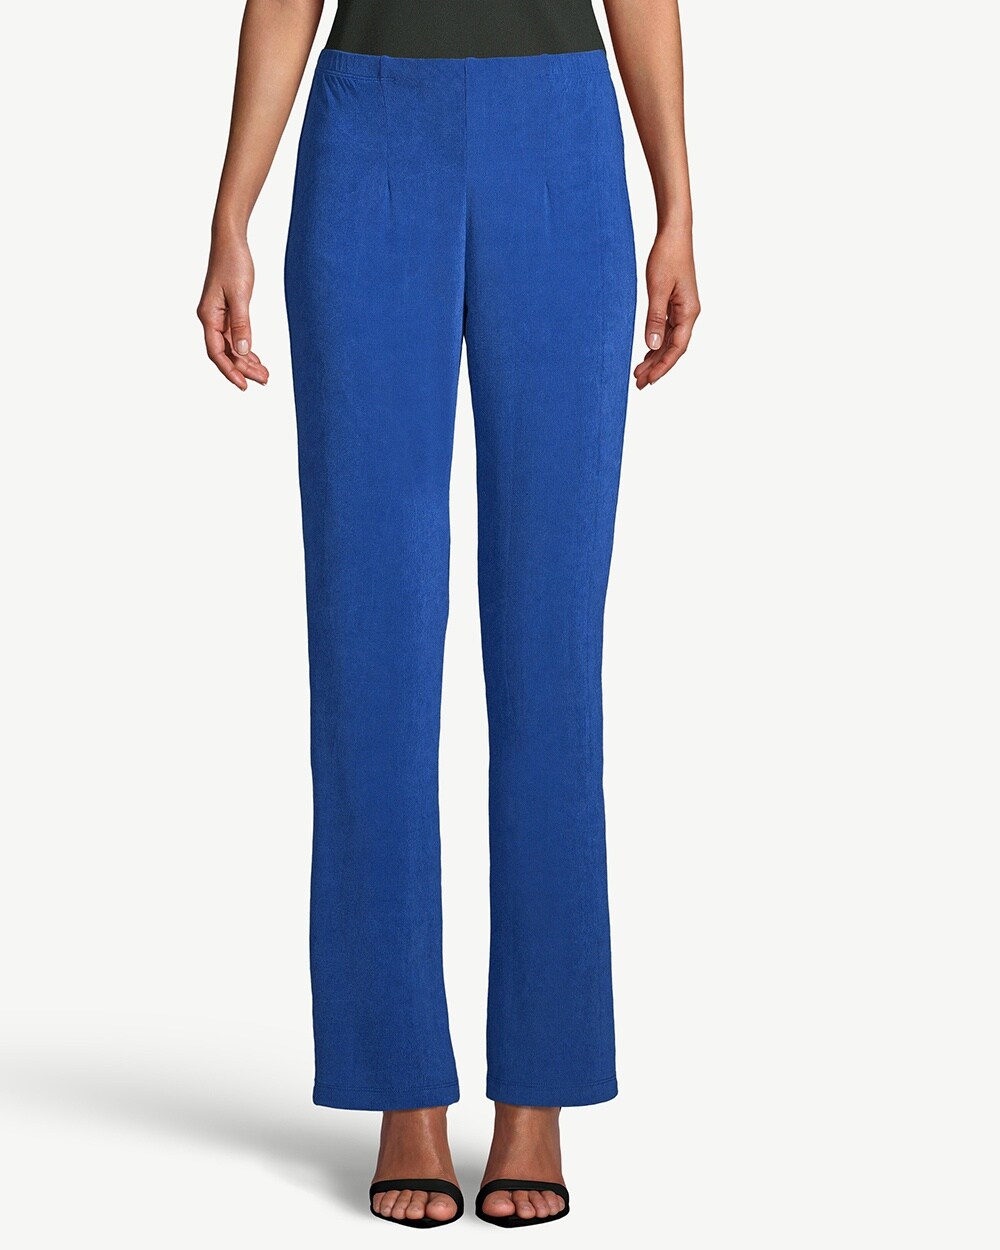 Travelers Collection Crepe Pants in India Ink - Chico's